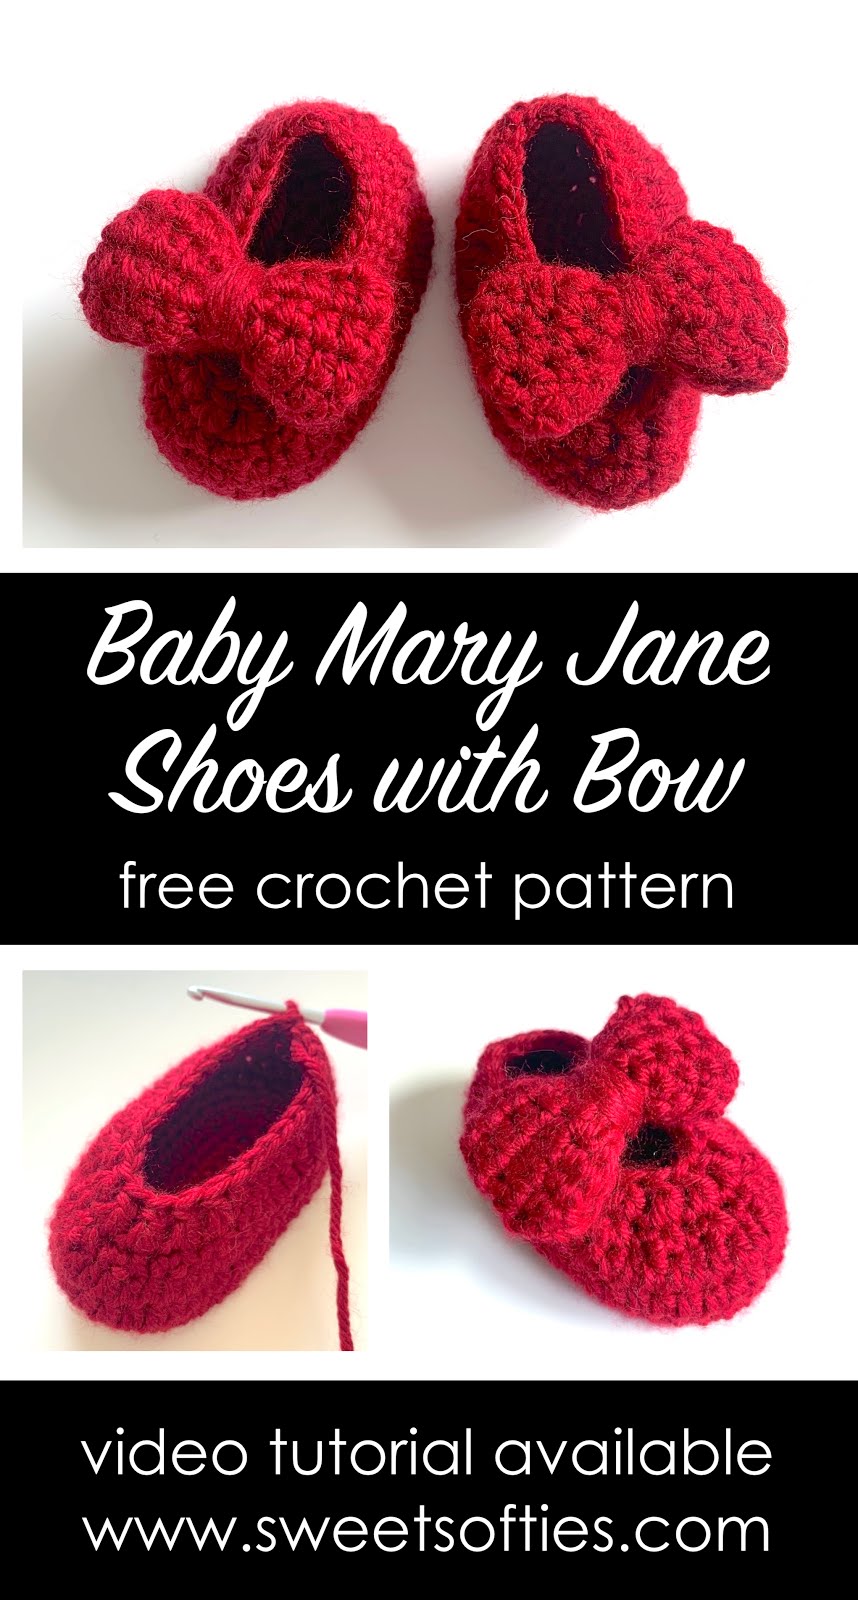 Baby Mary Jane Shoes with Bow (Free Crochet Pattern + Video Tutorial) -  Sweet Softies | Amigurumi and Crochet